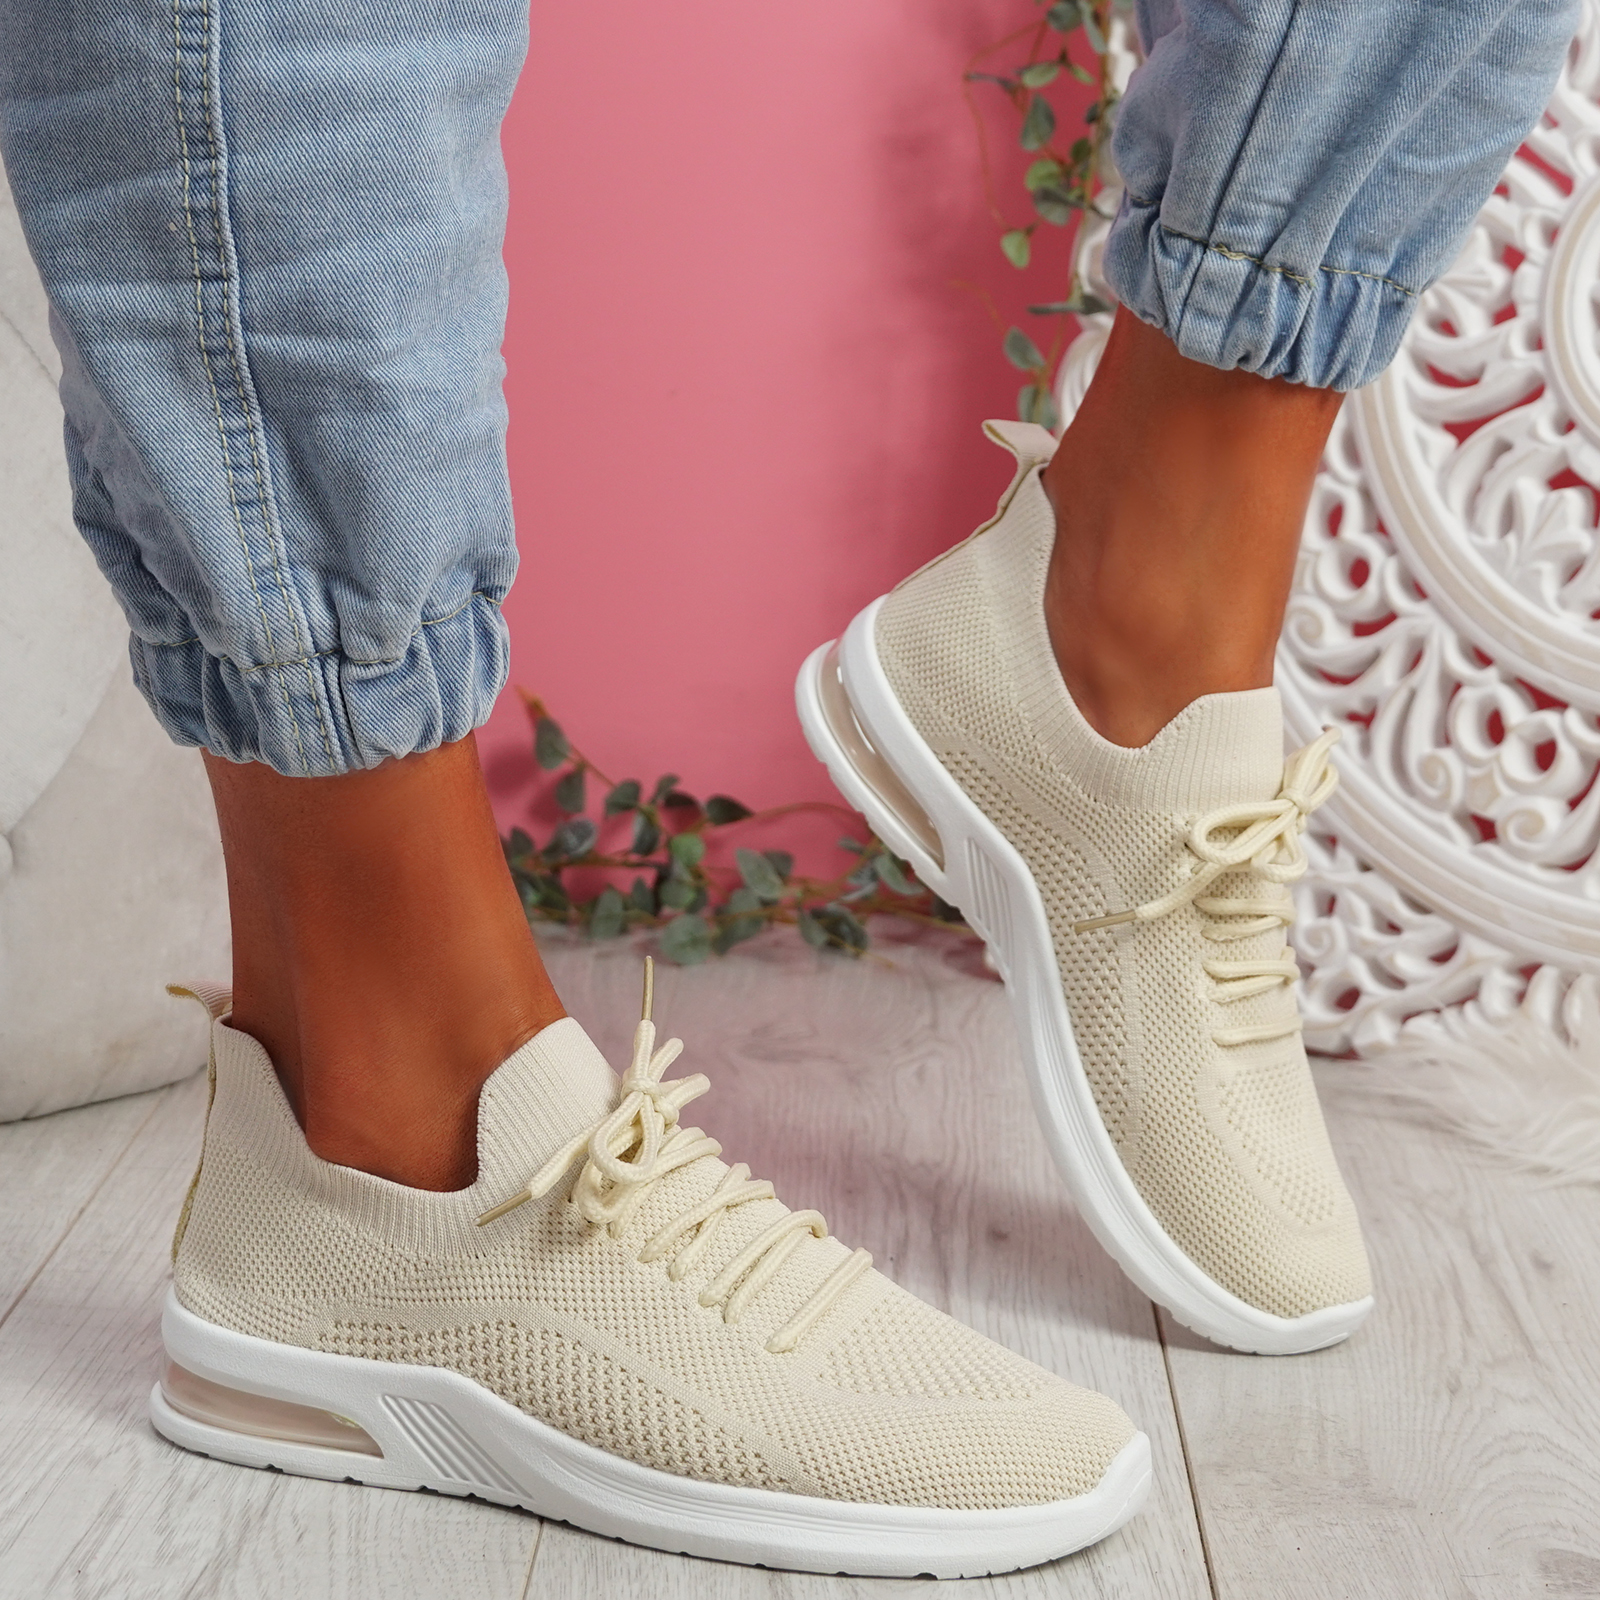 WOMENS LADIES KNIT LACE TRAINERS LOW HEEL RUNNING SNEAKERS FASHION ...